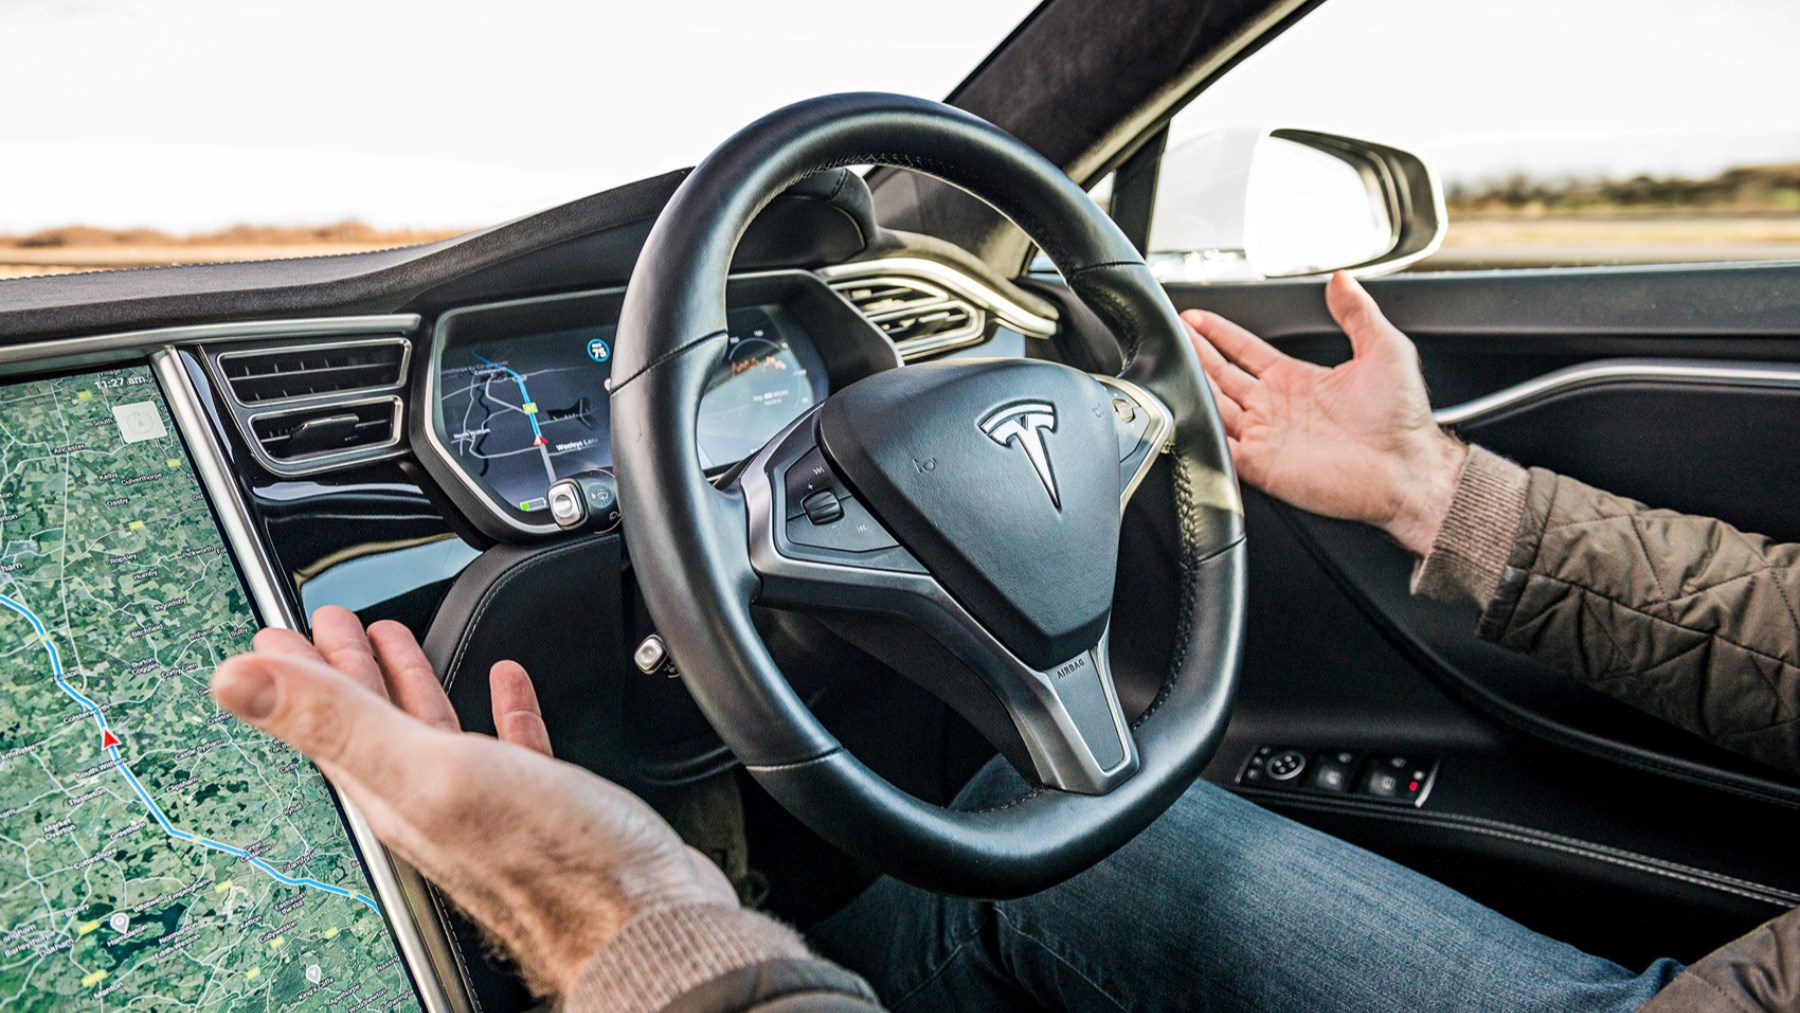 Tesla's Autonomy Ambitions Under Legal Scrutiny A Deep Dive into the Ongoing Lawsuit and Musk's Vision for Self-Driving Cars